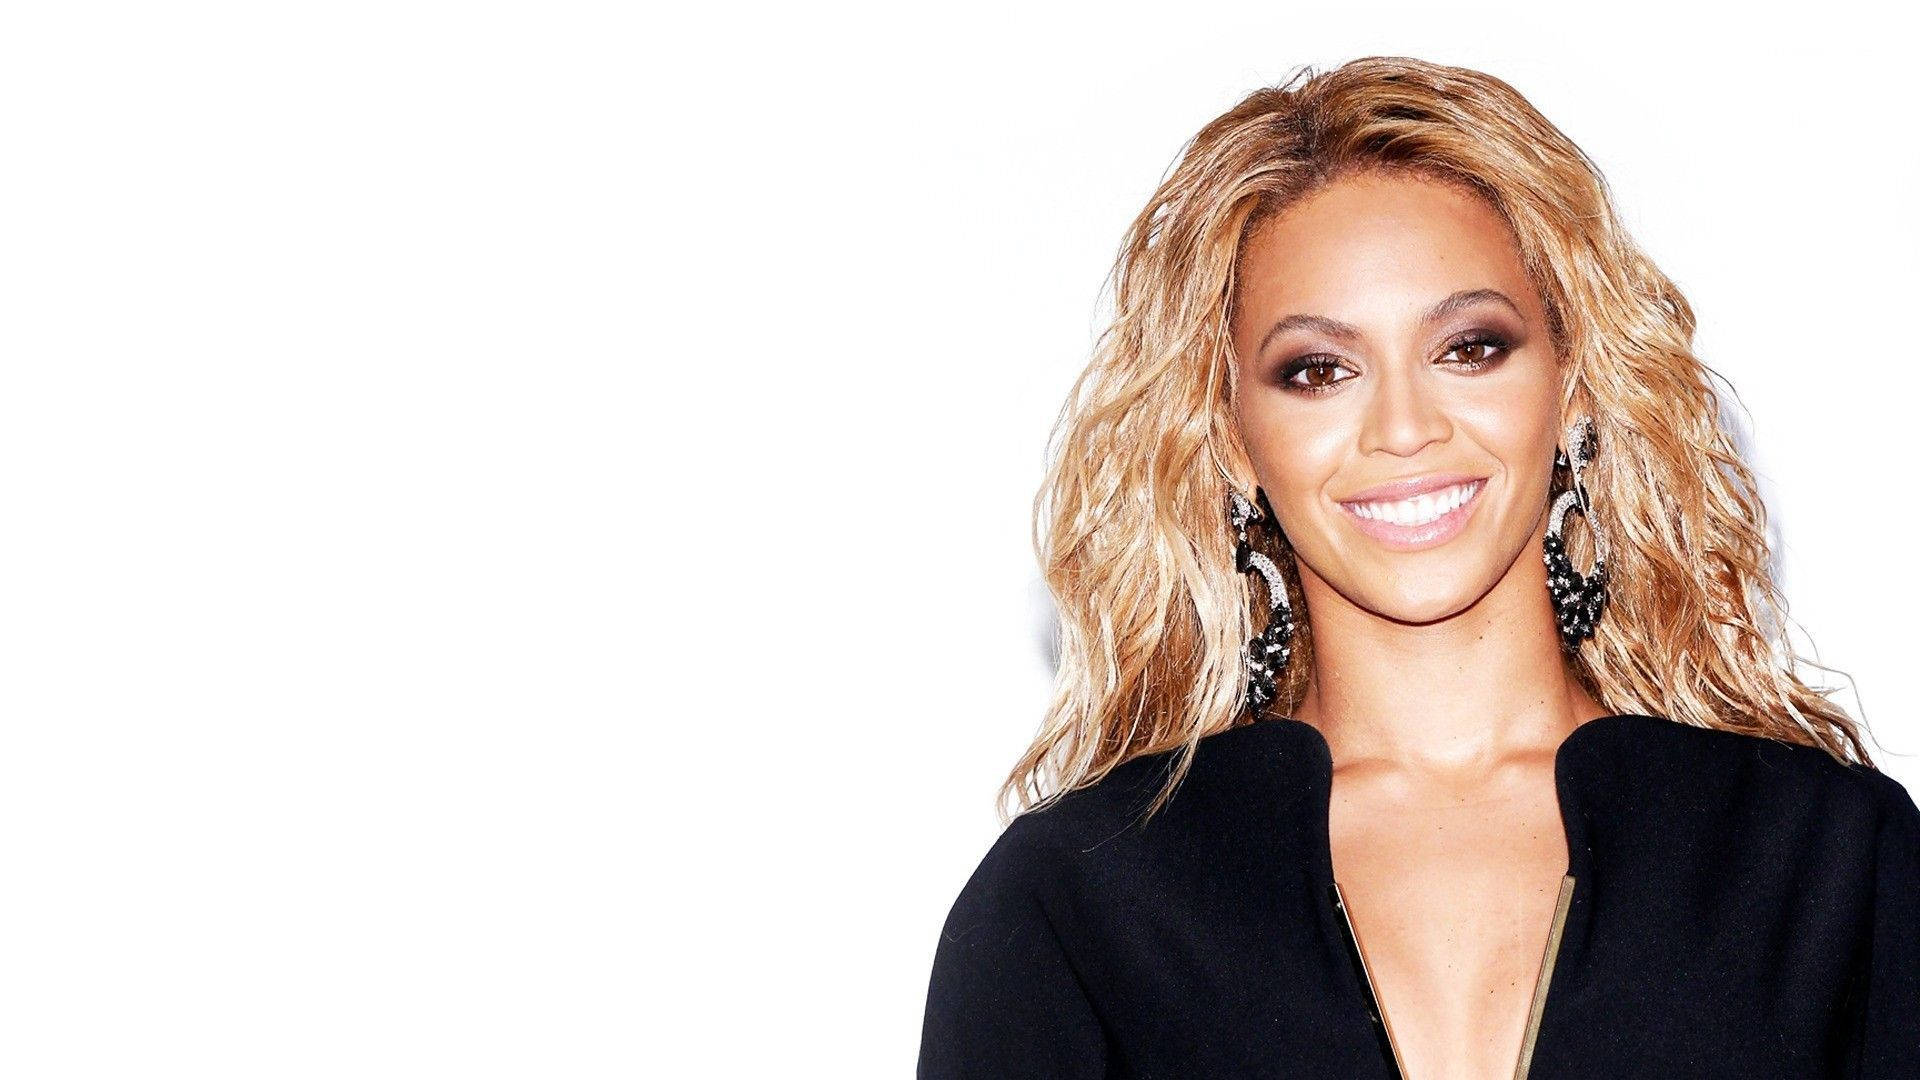 Beyonce With Happy Face Background